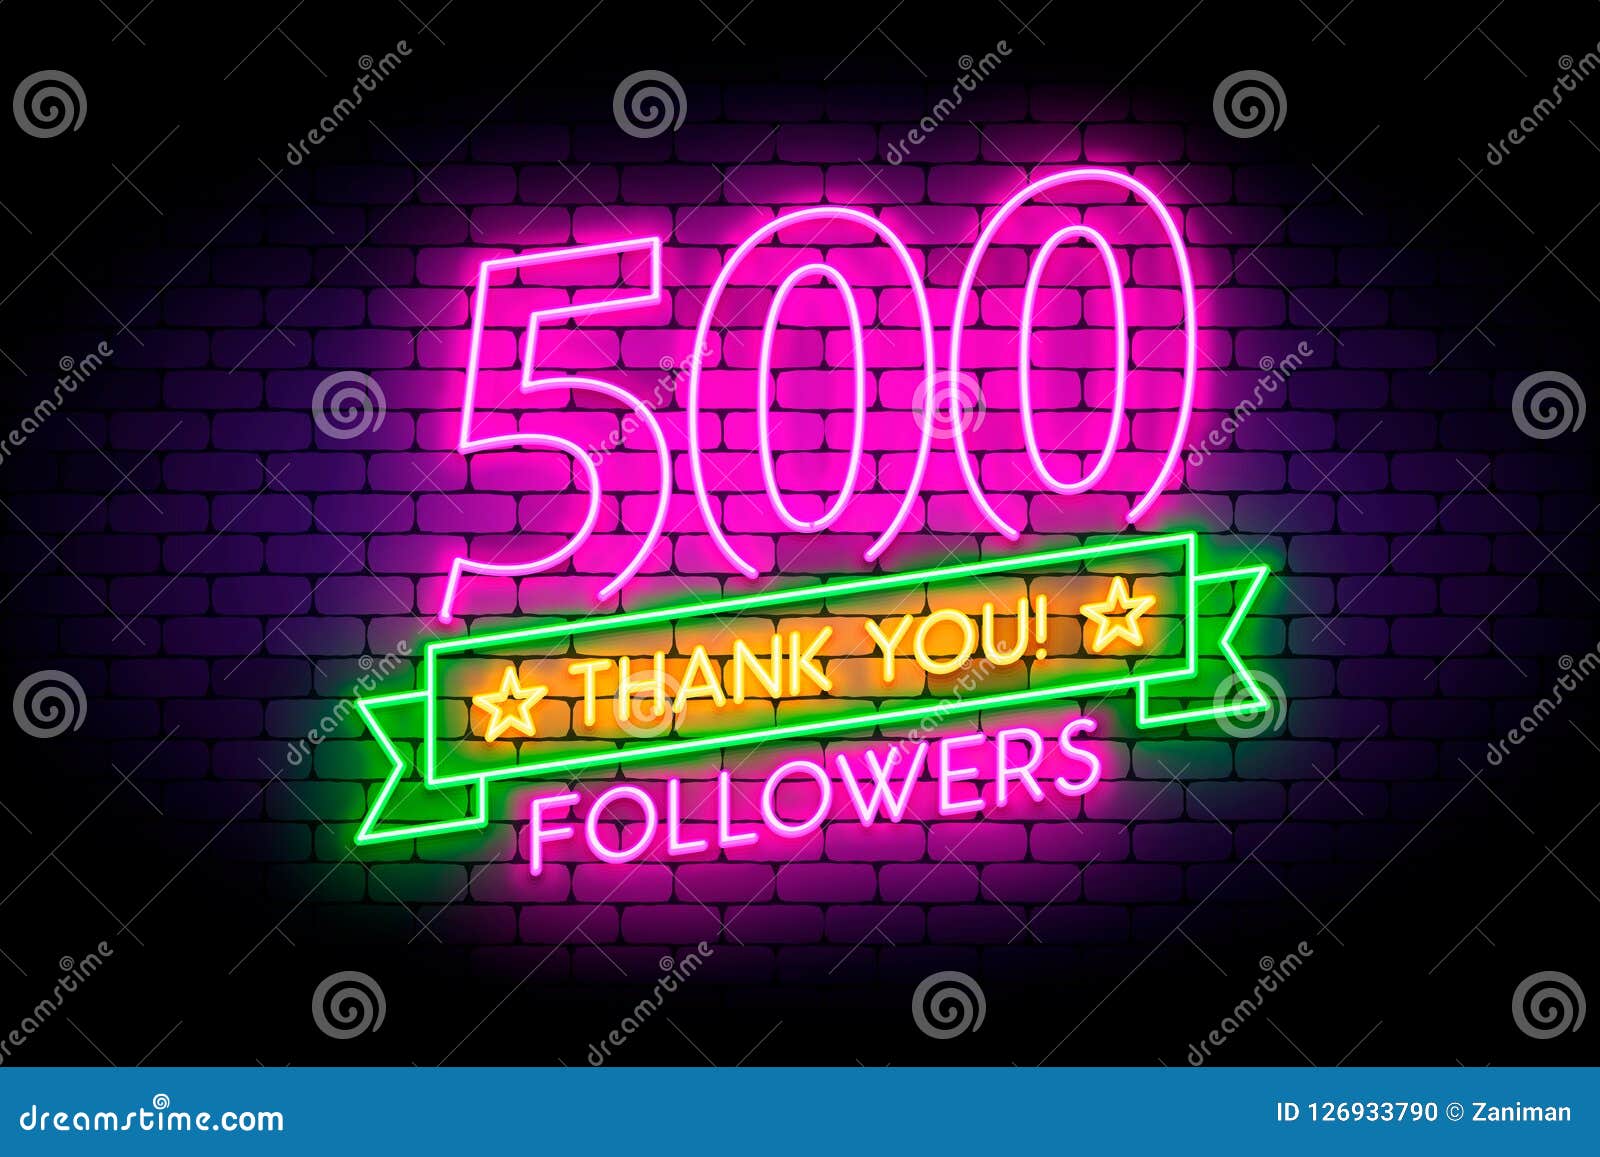 500 followers neon sign on the wall.